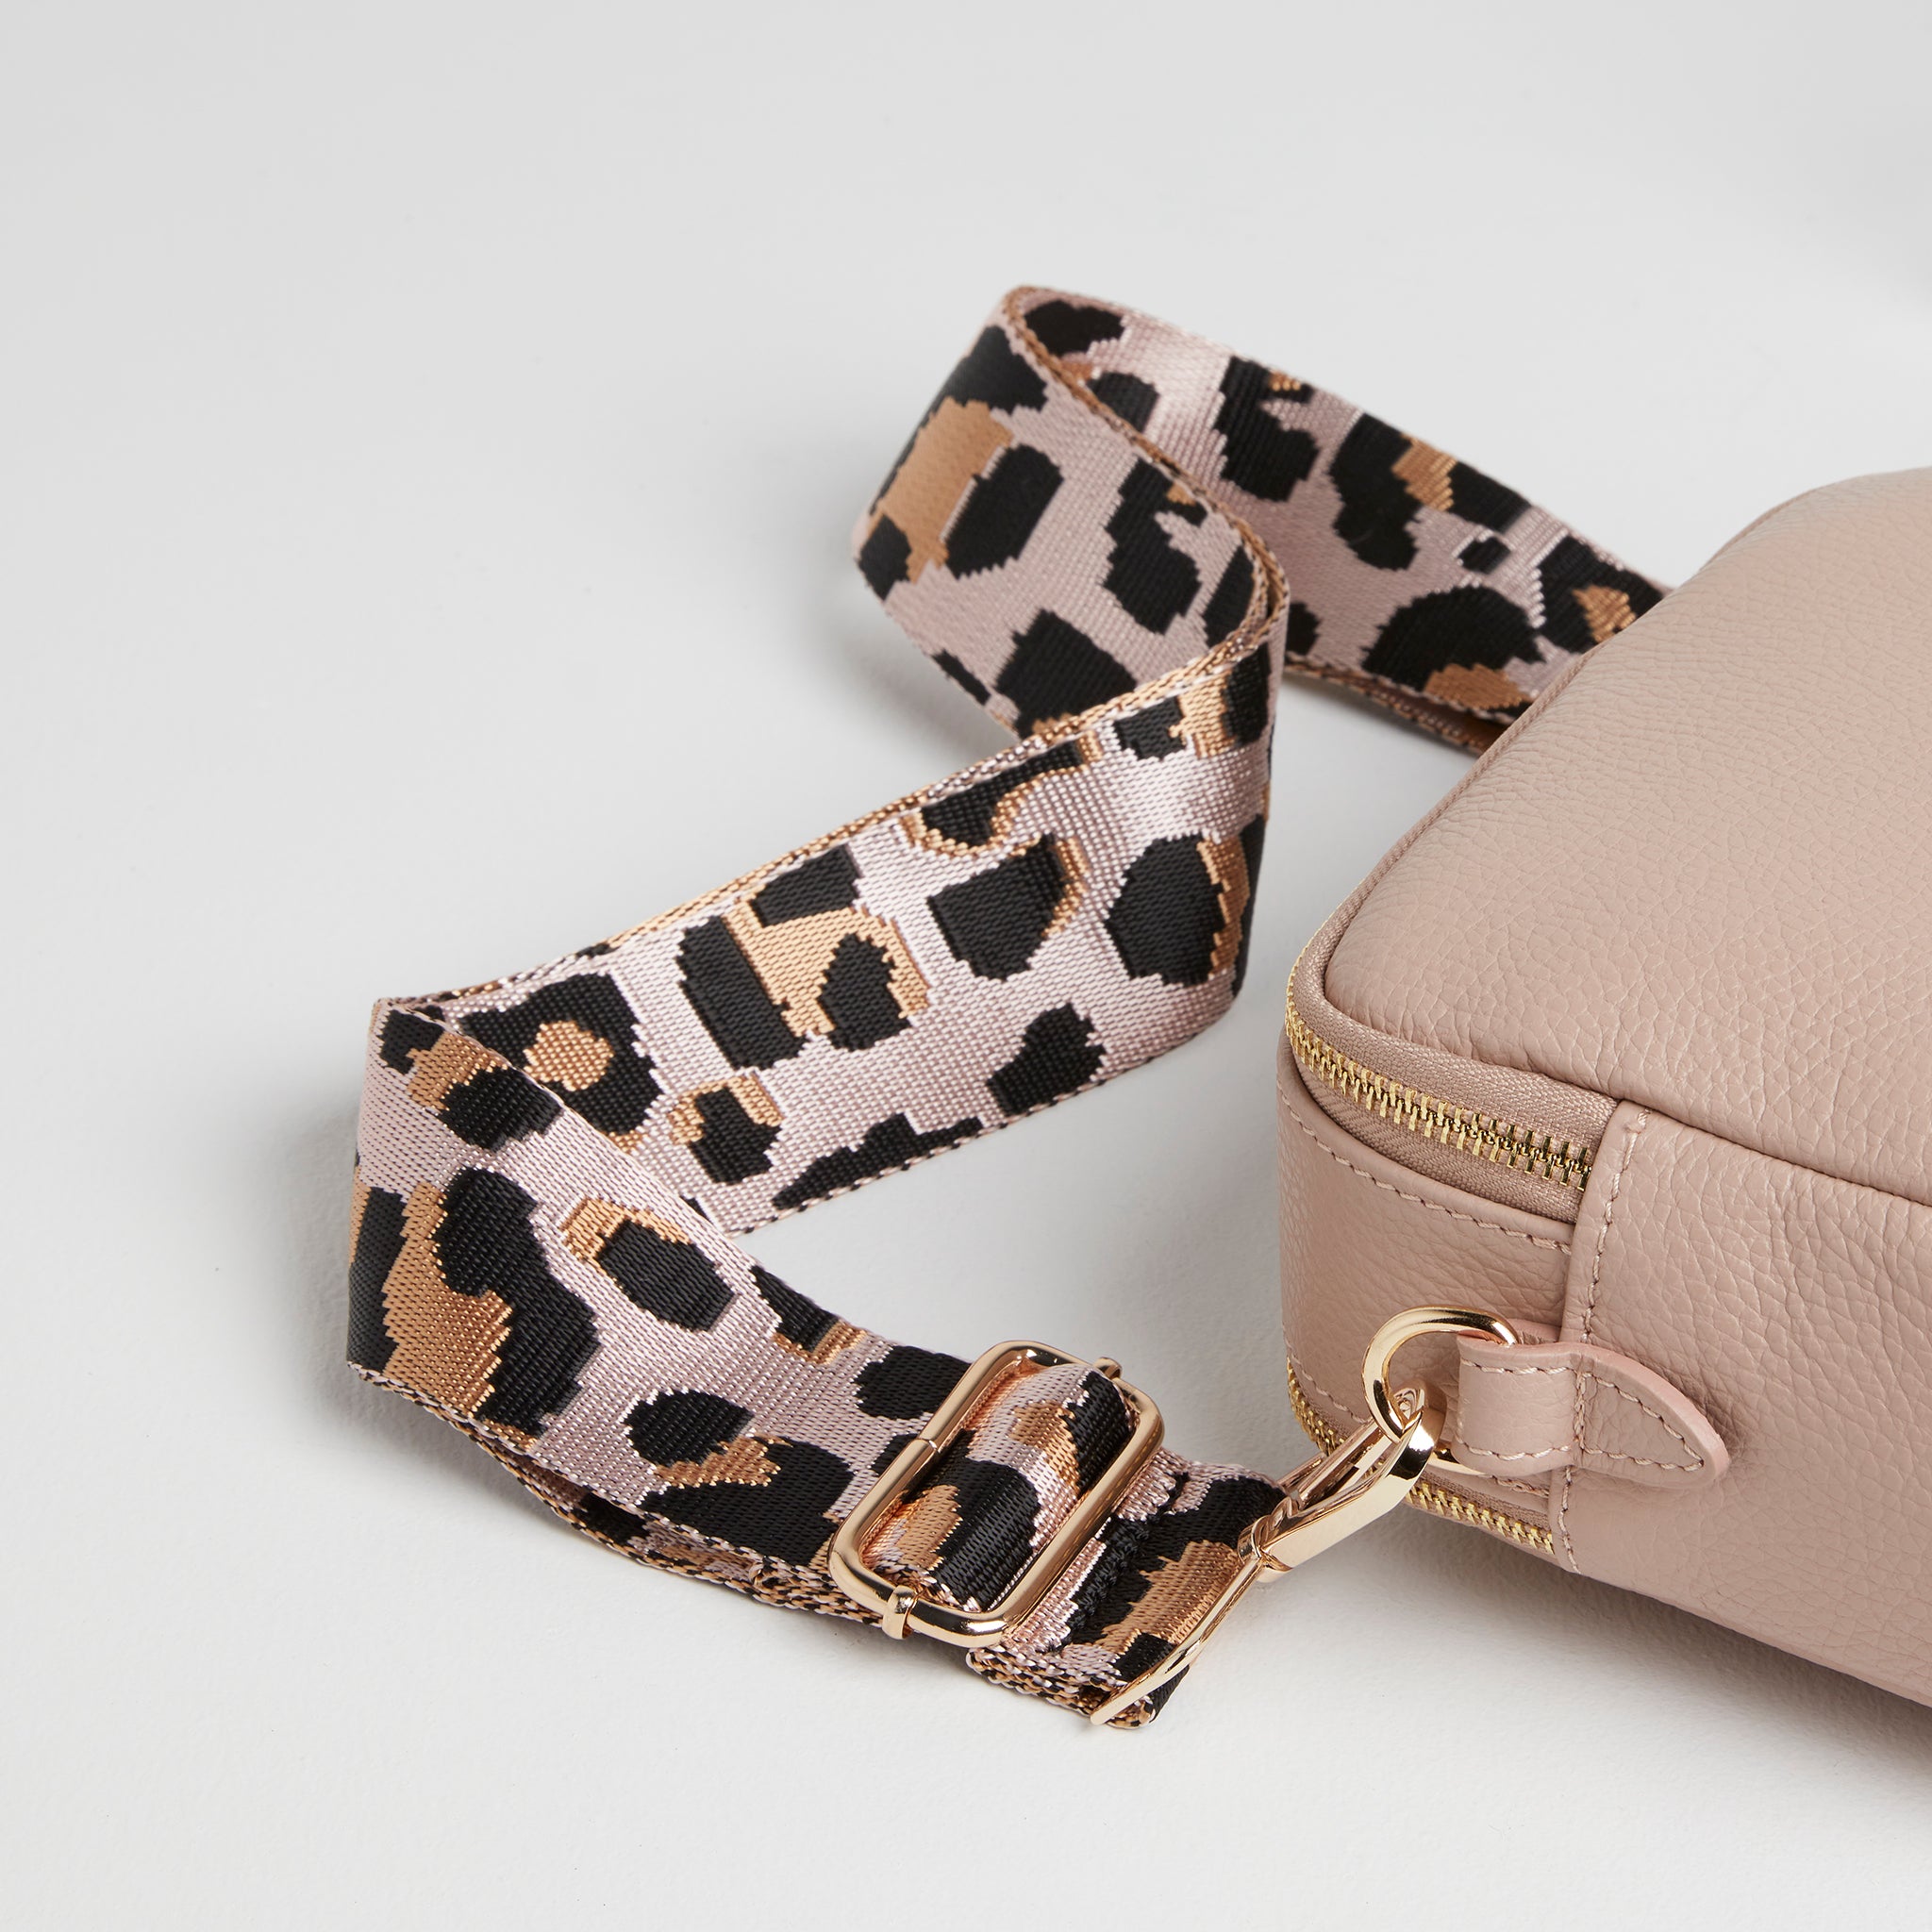 Sienna Crossbody Bag in Blush with Light Pink Leopard Print Strap